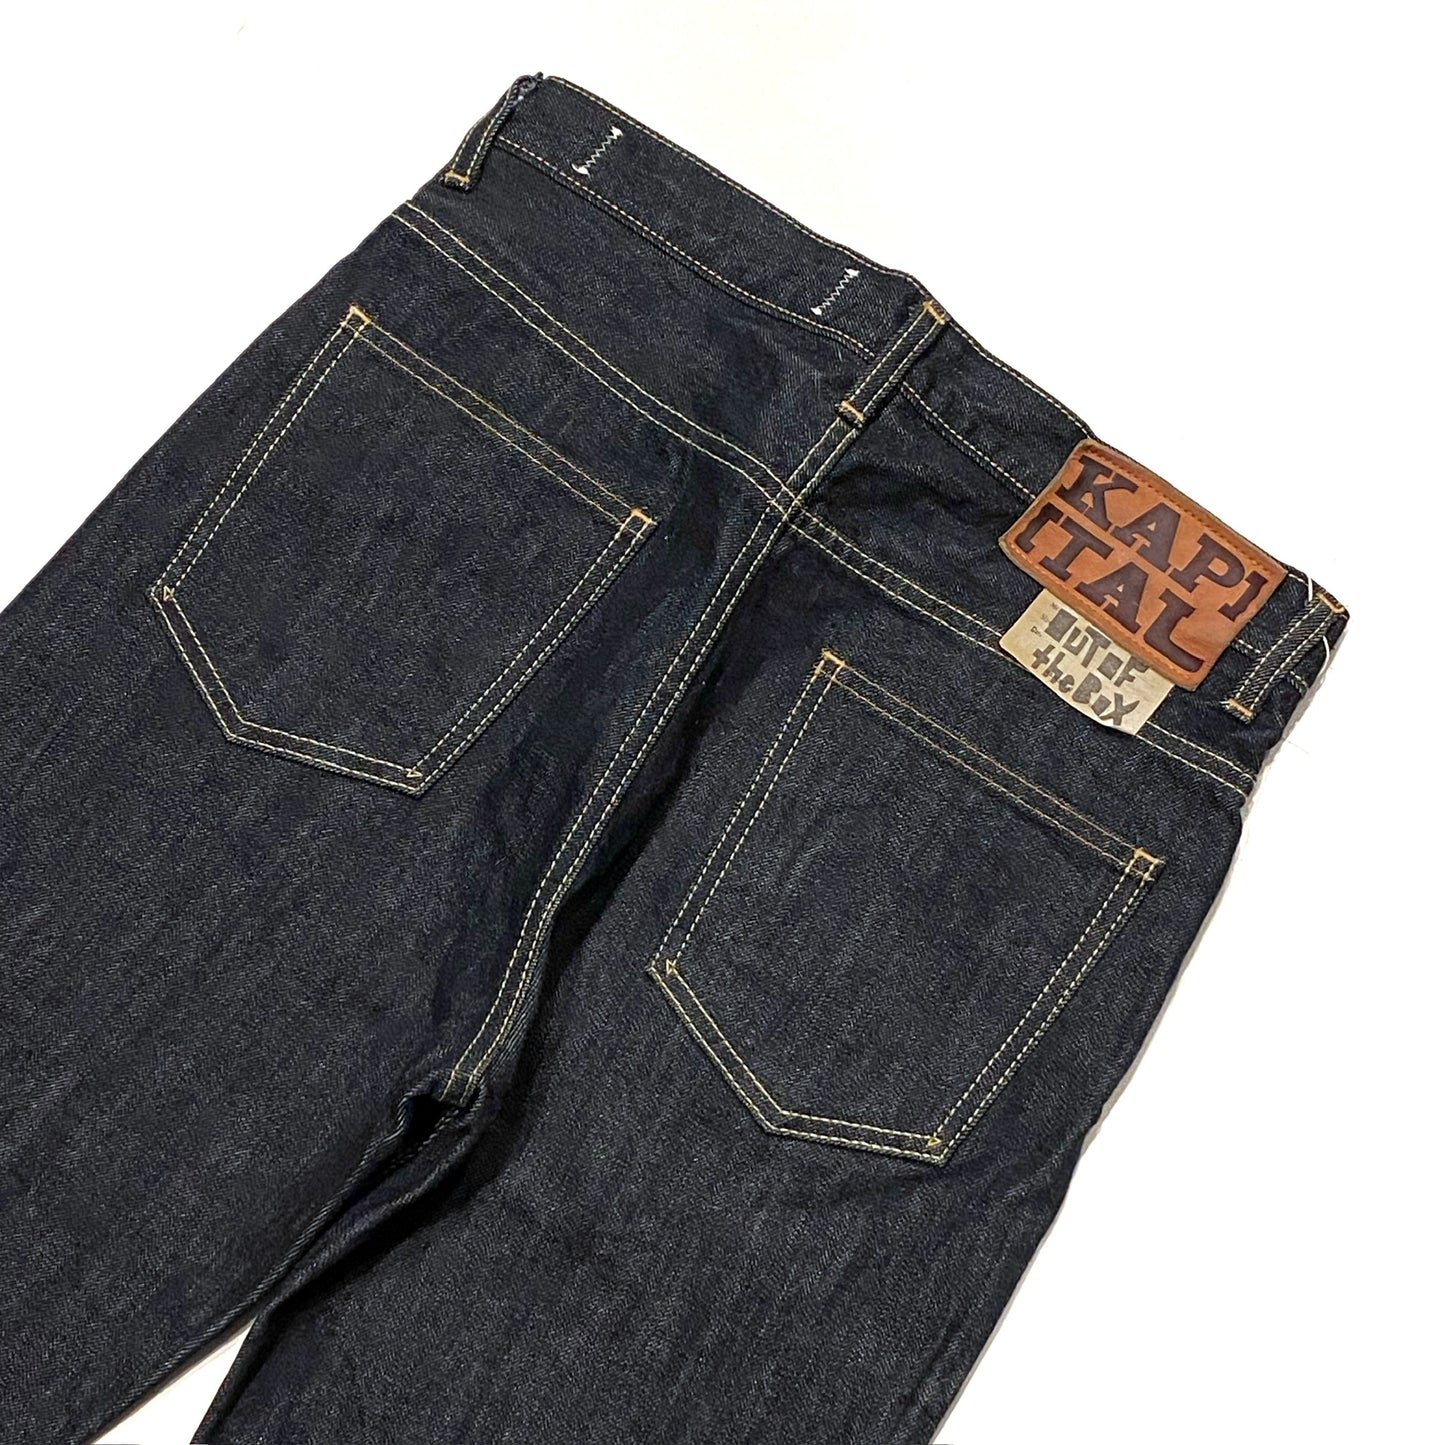 (Consignment) Kapital Jeans